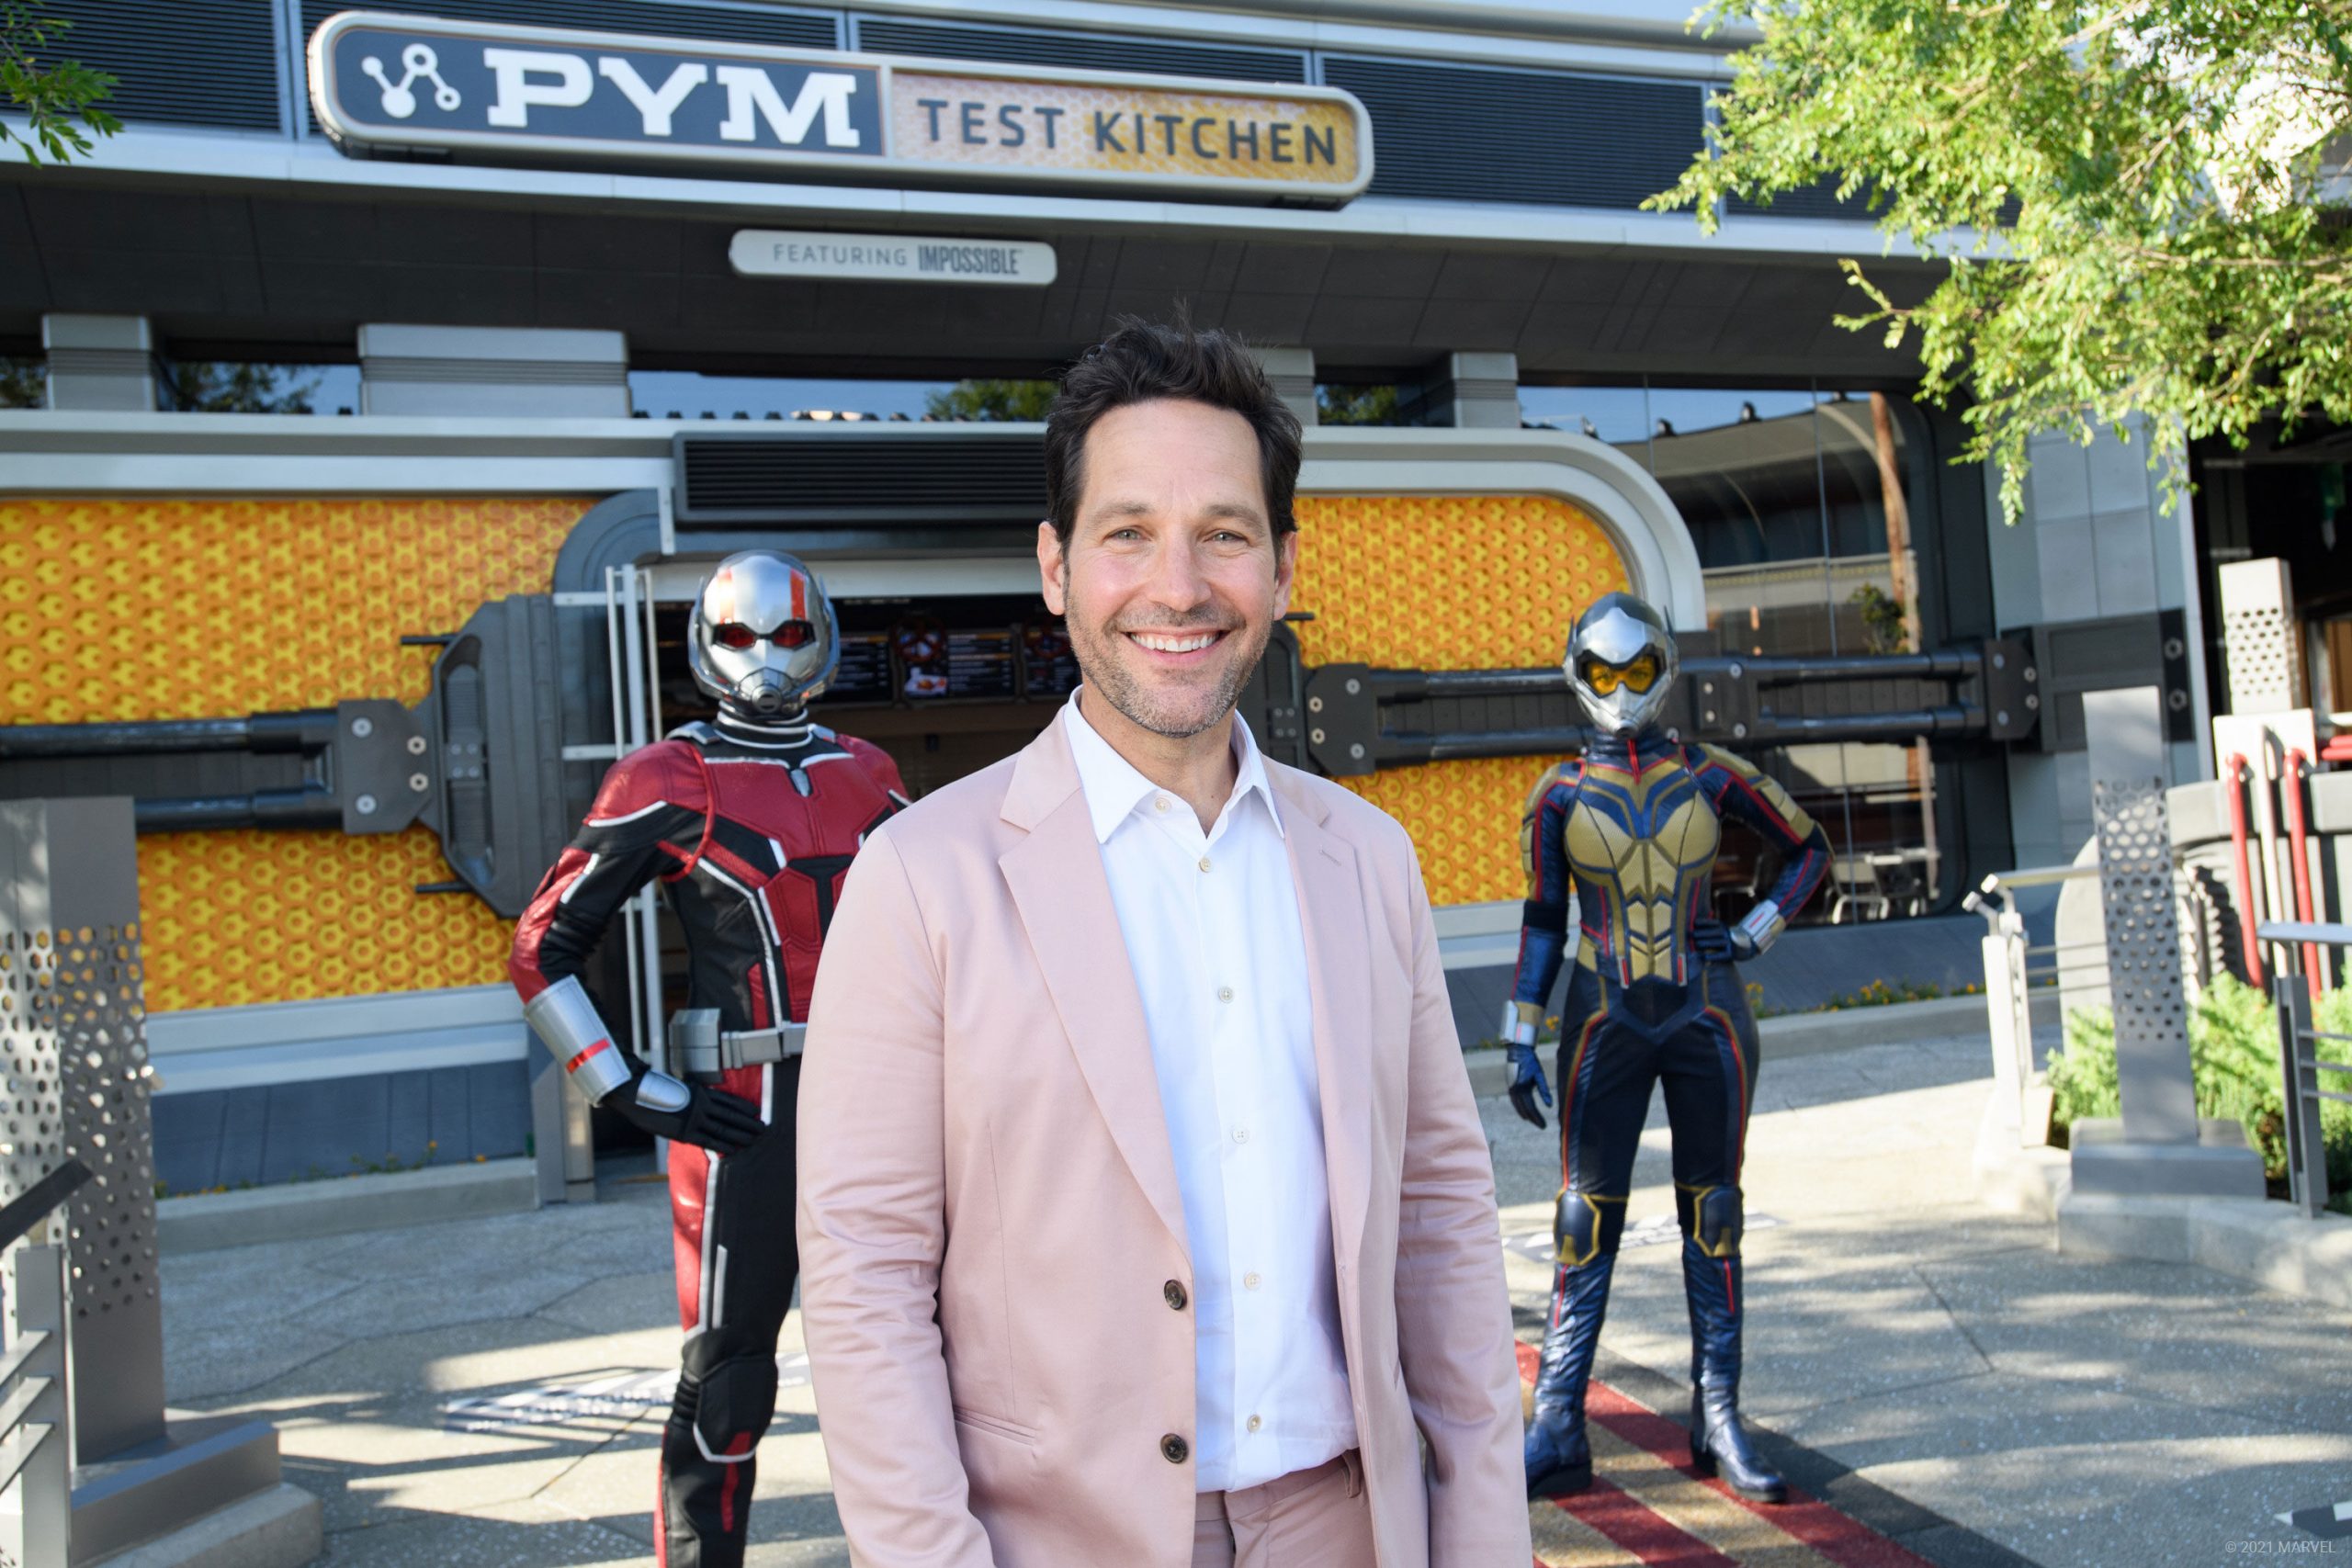 Paul Rudd sends letter and signed helmet to a 12-year-old boy bullied at school